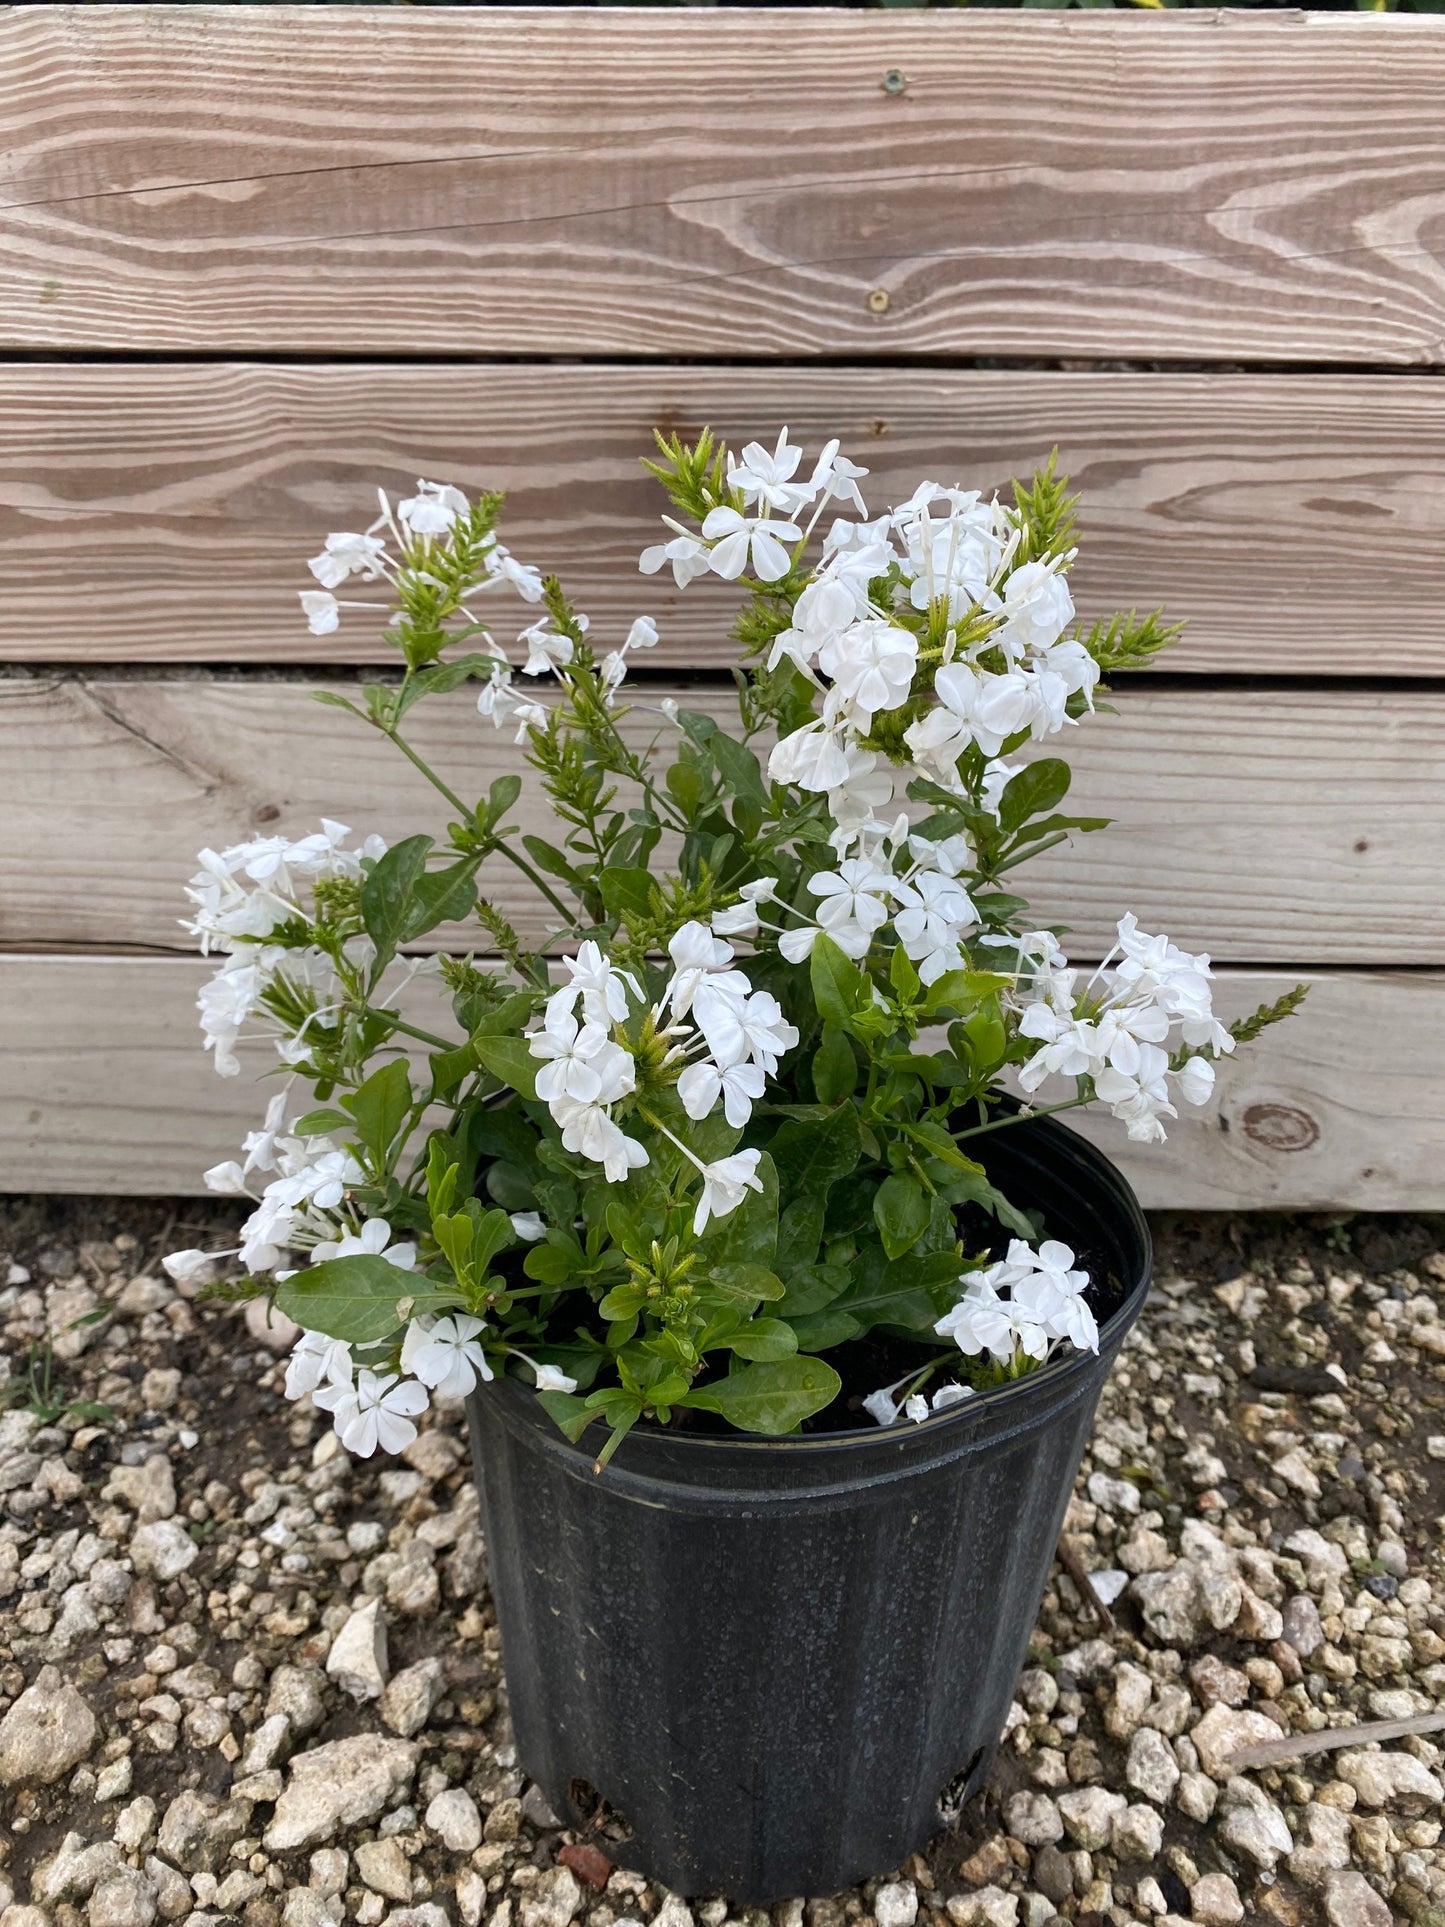 White Cape Plumbago Plumbago auriculata 10” inch pot  FREE Shipping East Coast and Central States